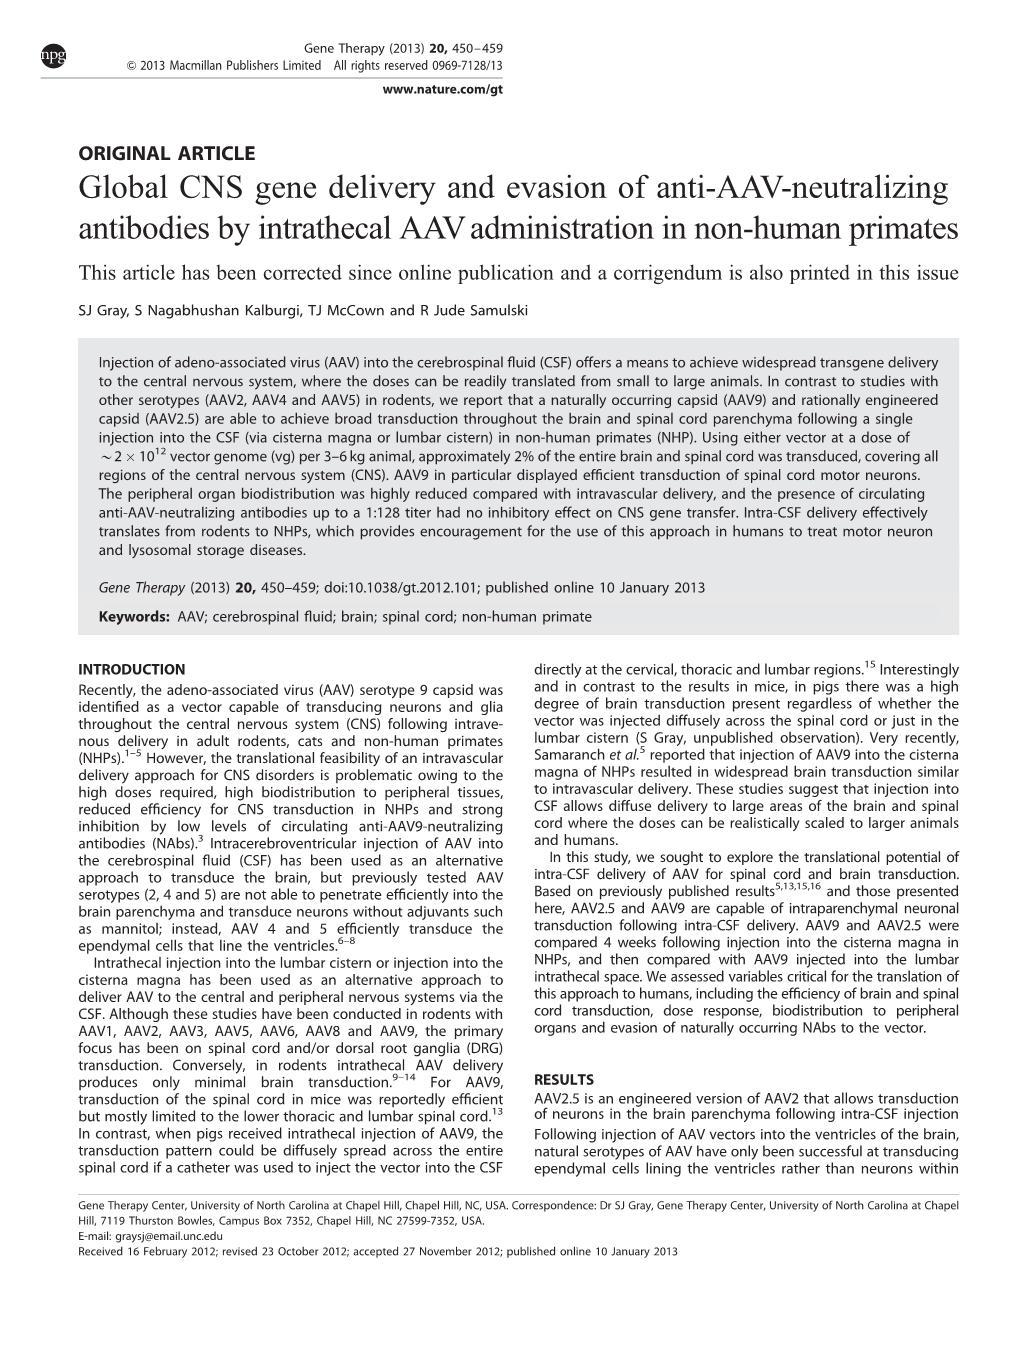 Global CNS Gene Delivery and Evasion of Anti-AAV-Neutralizing